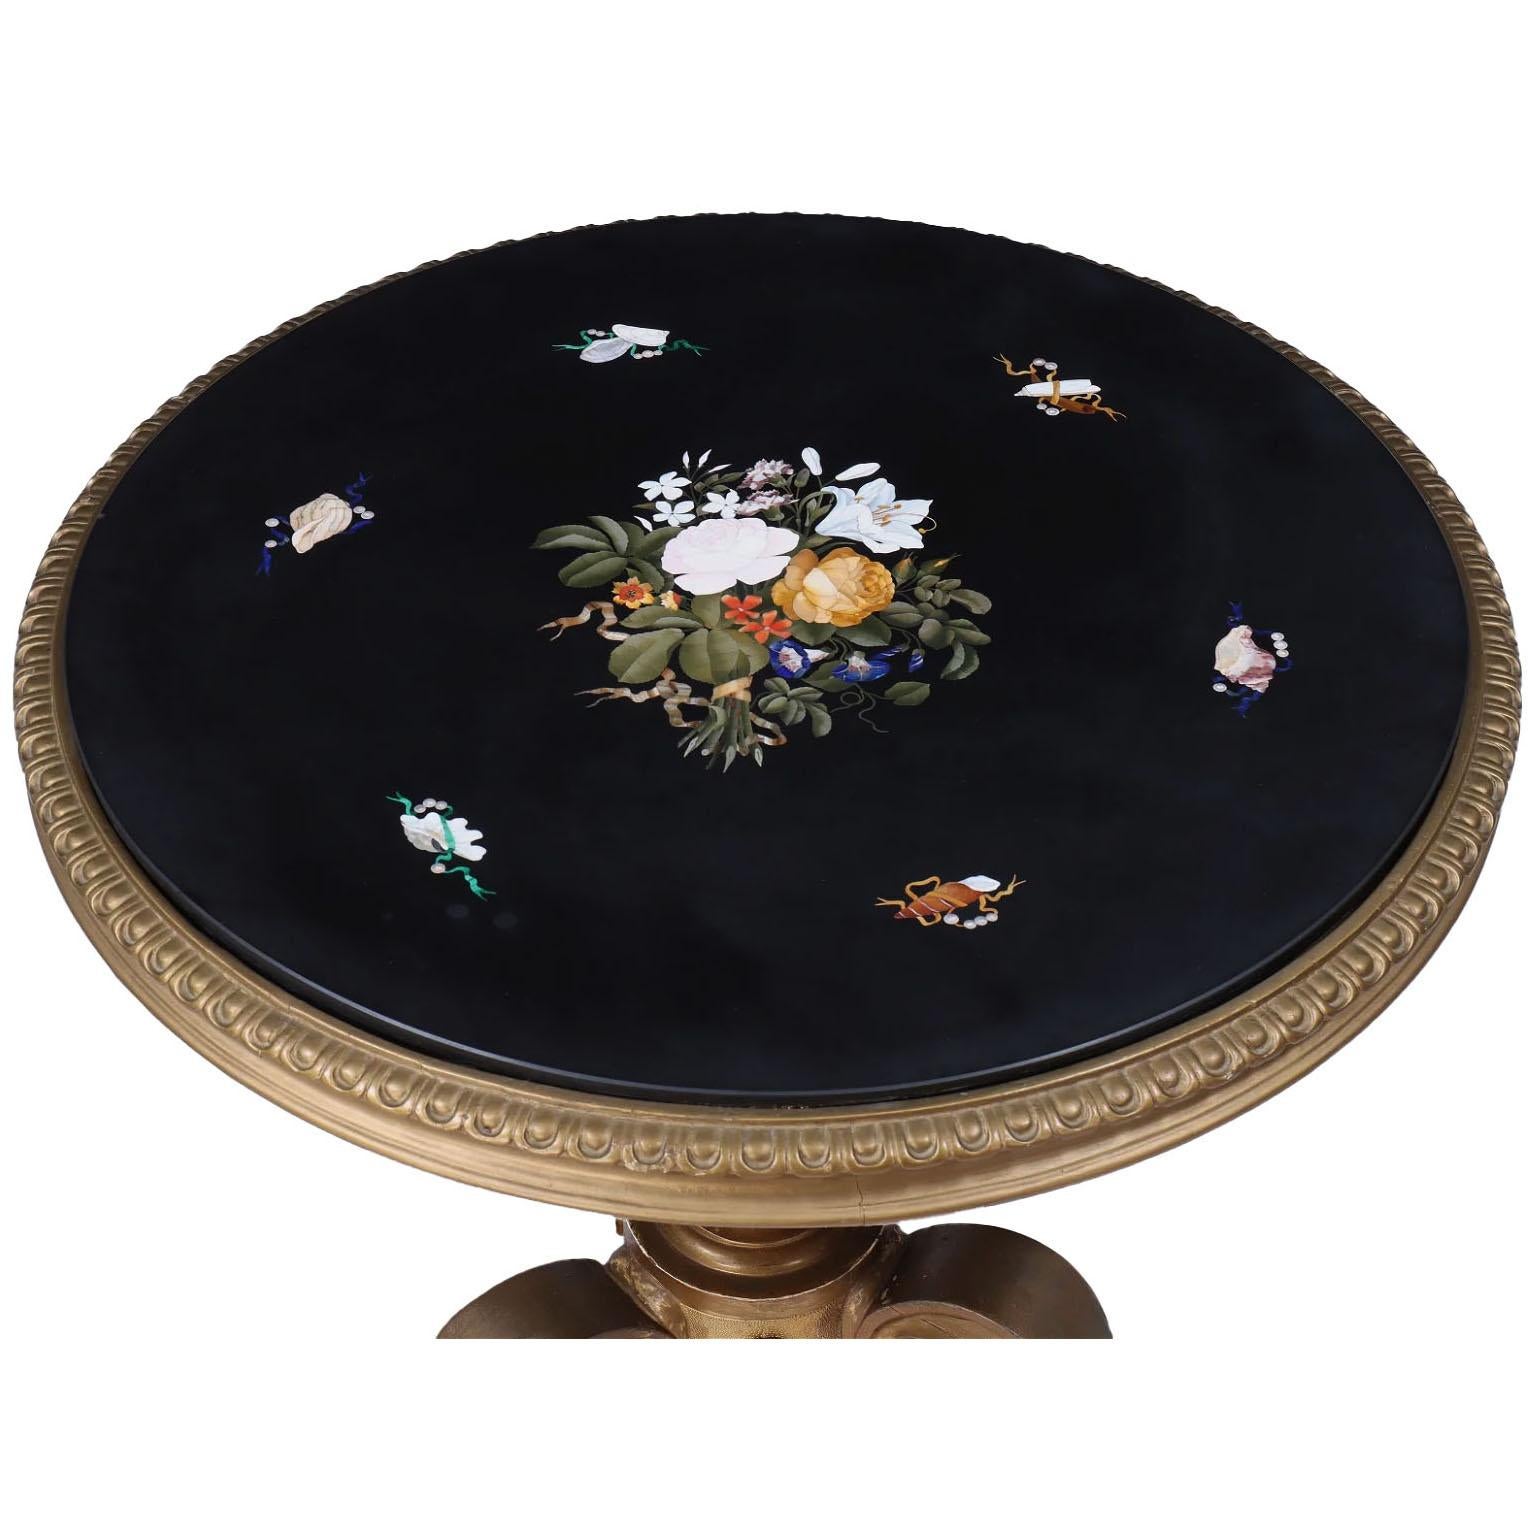 Baroque Revival An Italian 19th Century Florentine Pietra Dura Inlaid Table on a Giltwood Stand For Sale